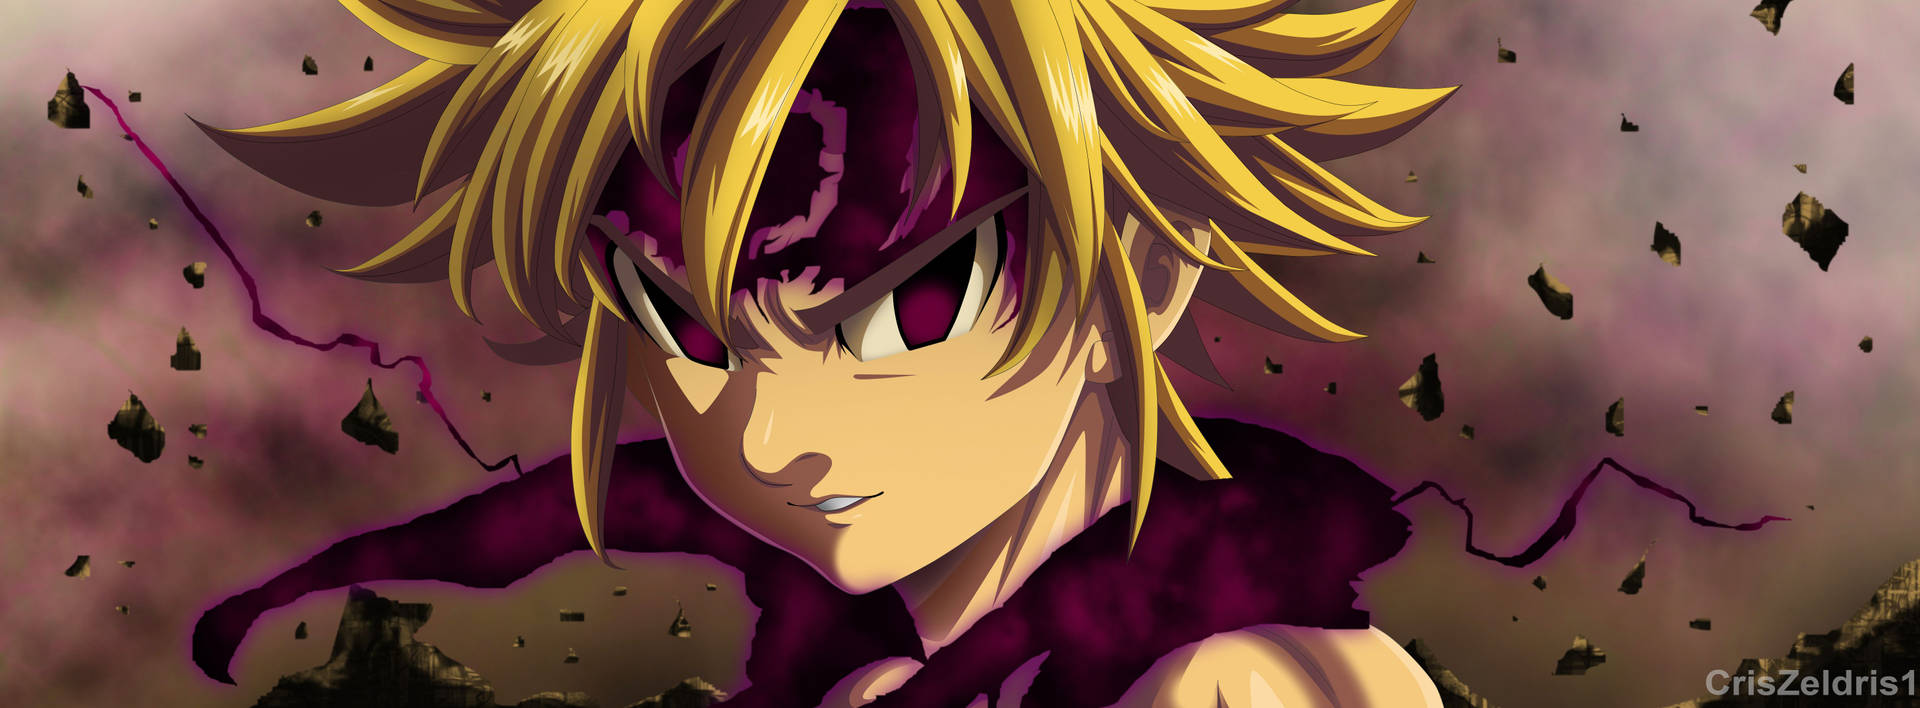 Meliodas protecting Britannia from evil with The Seven Deadly Sins Wallpaper